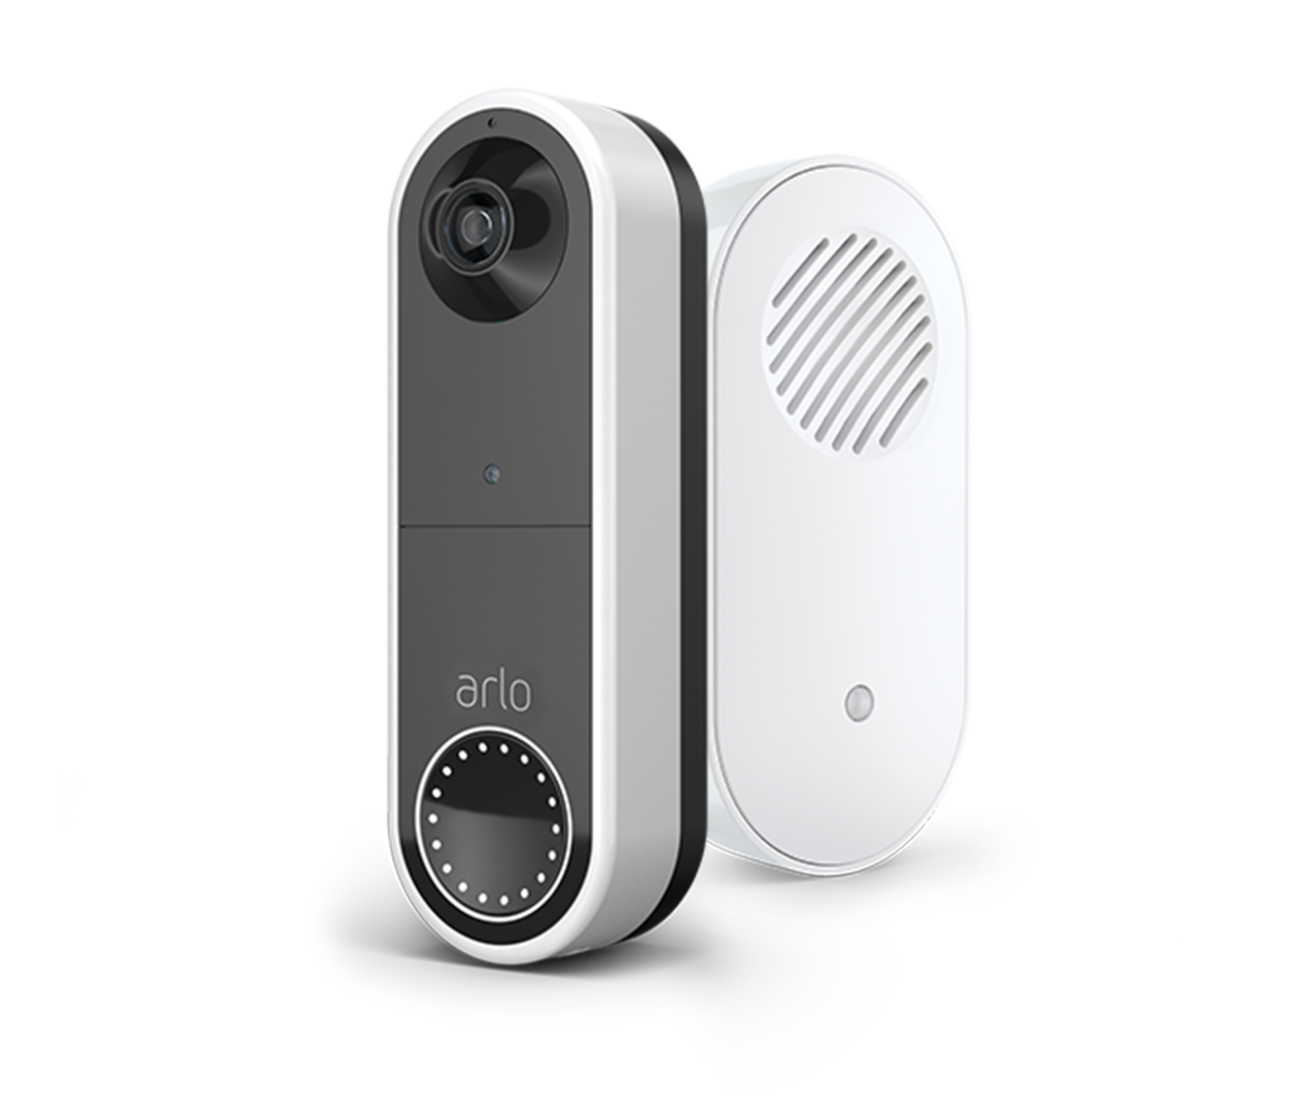 A white wireless video doorbell and chime